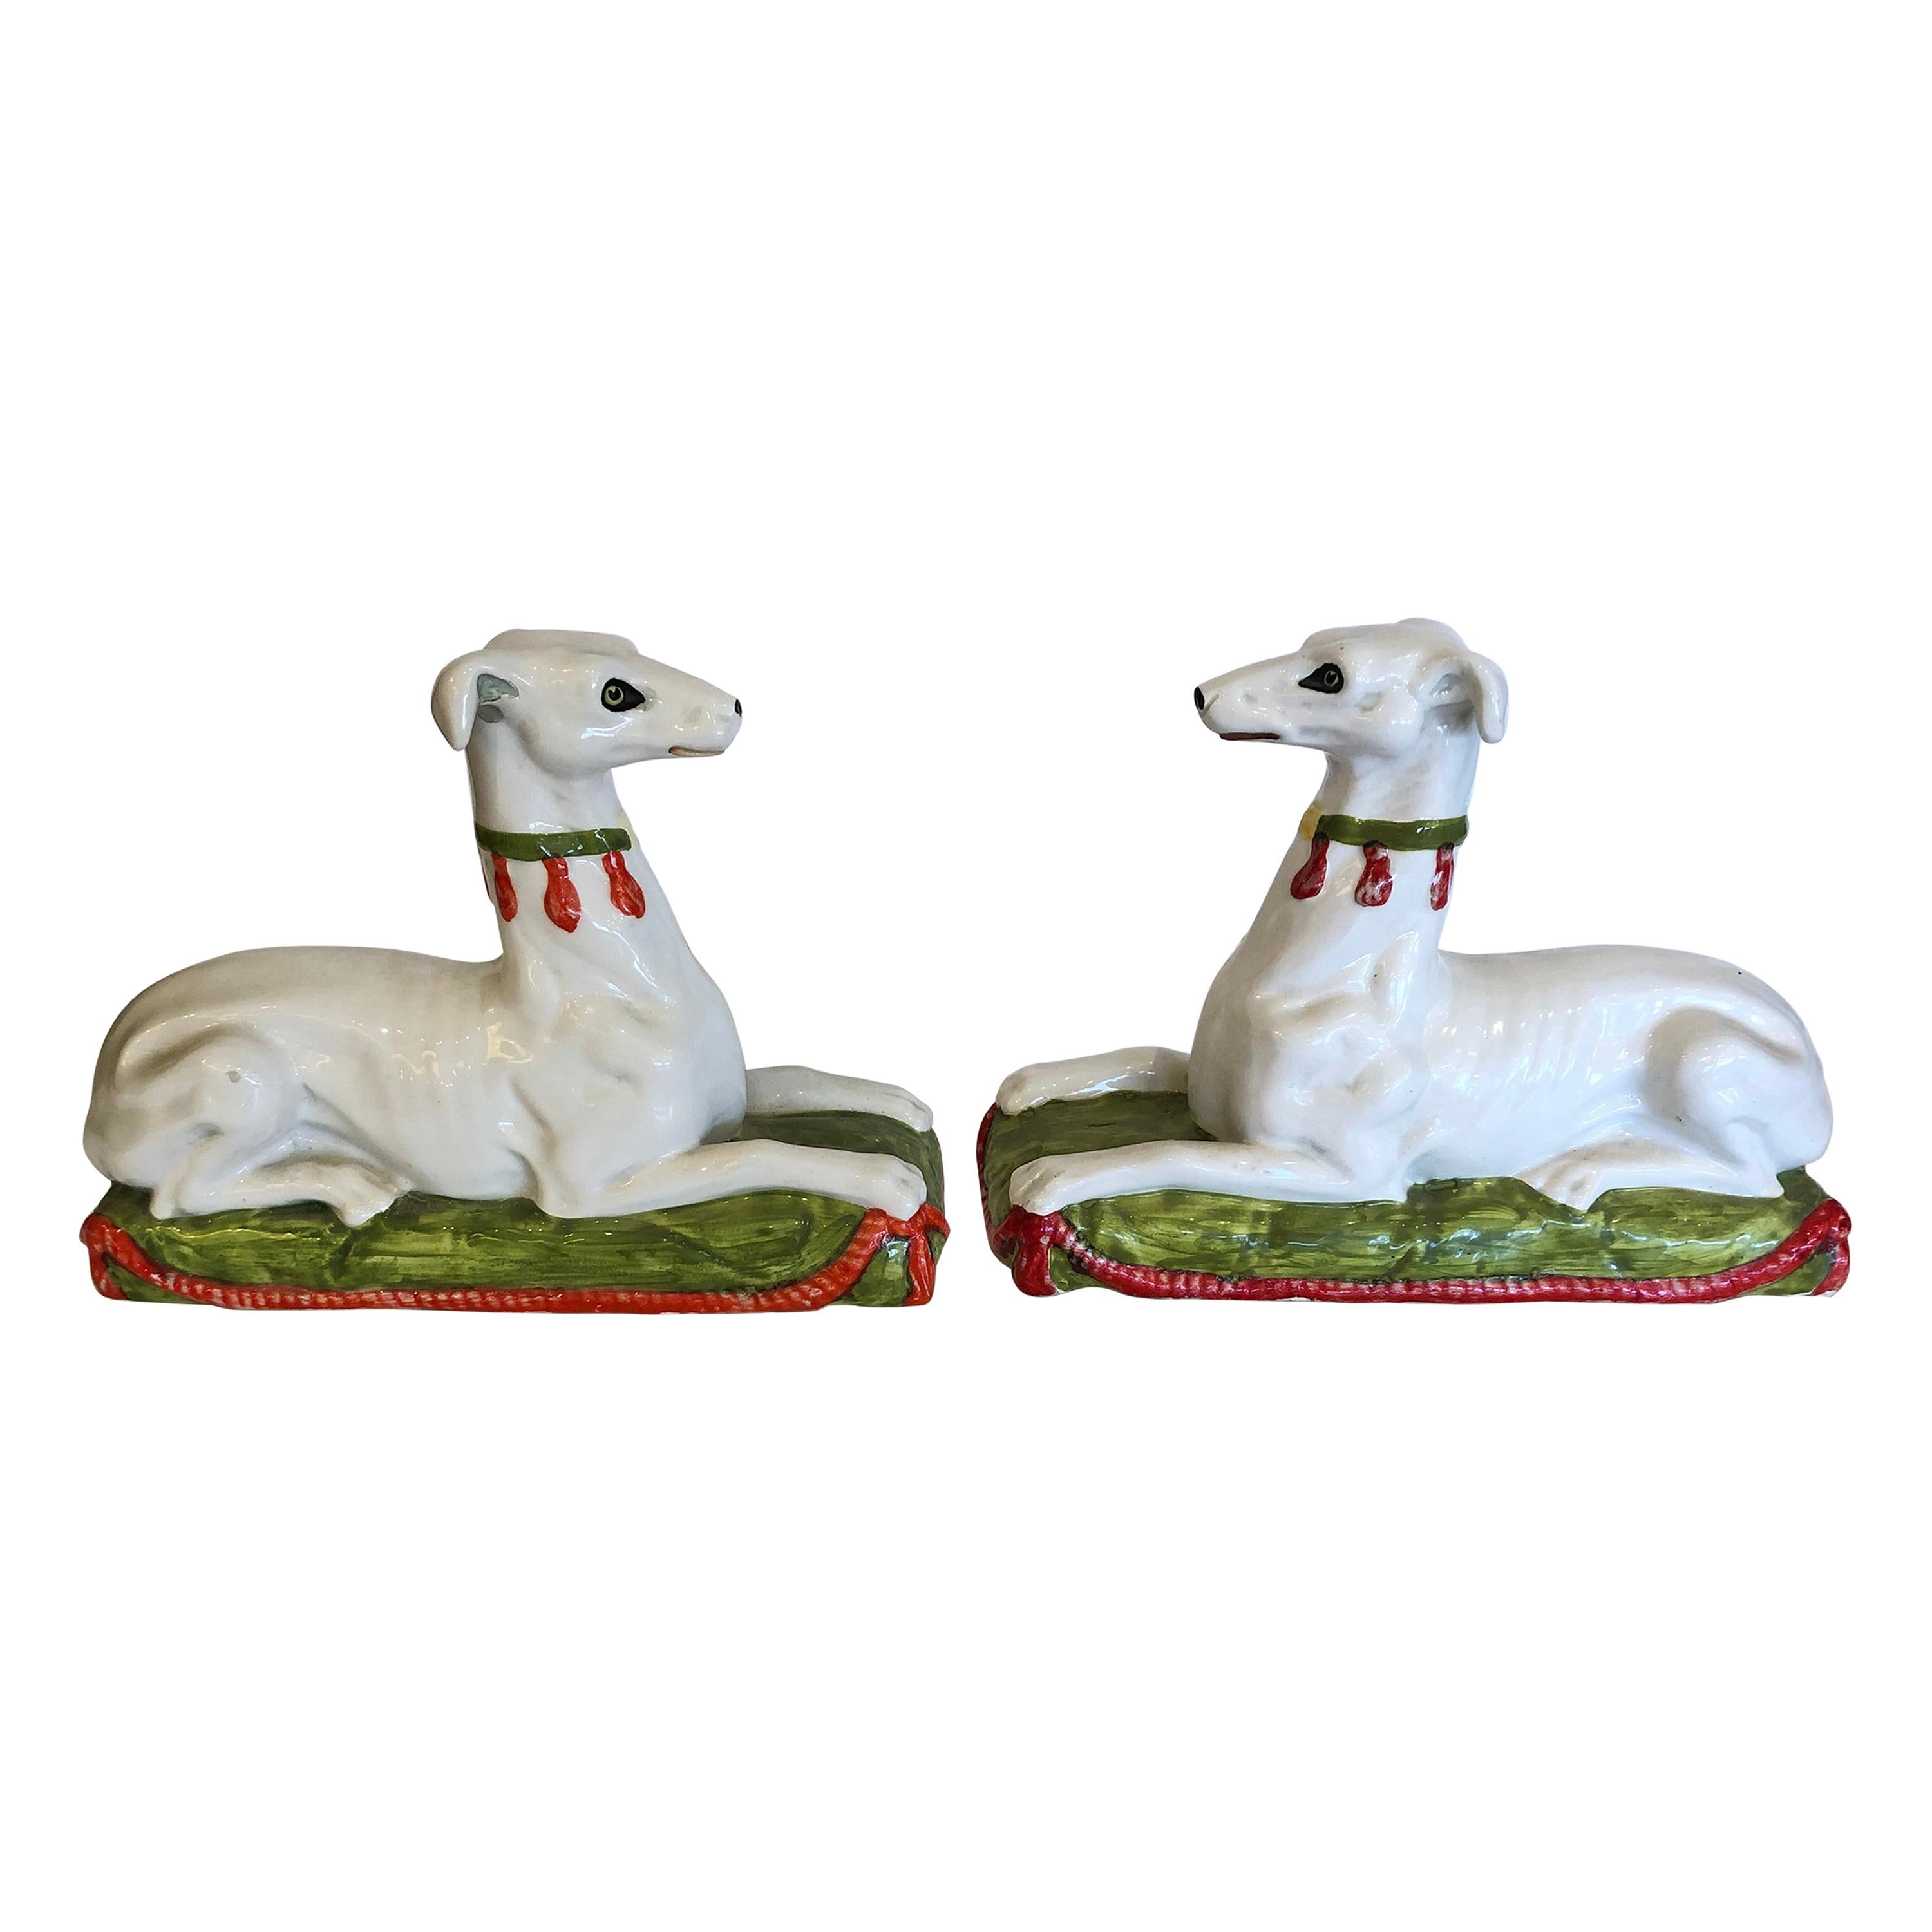 Striking Unusual Pair of Italian Ceramic Recument Whippets Greyhounds Sculptures For Sale